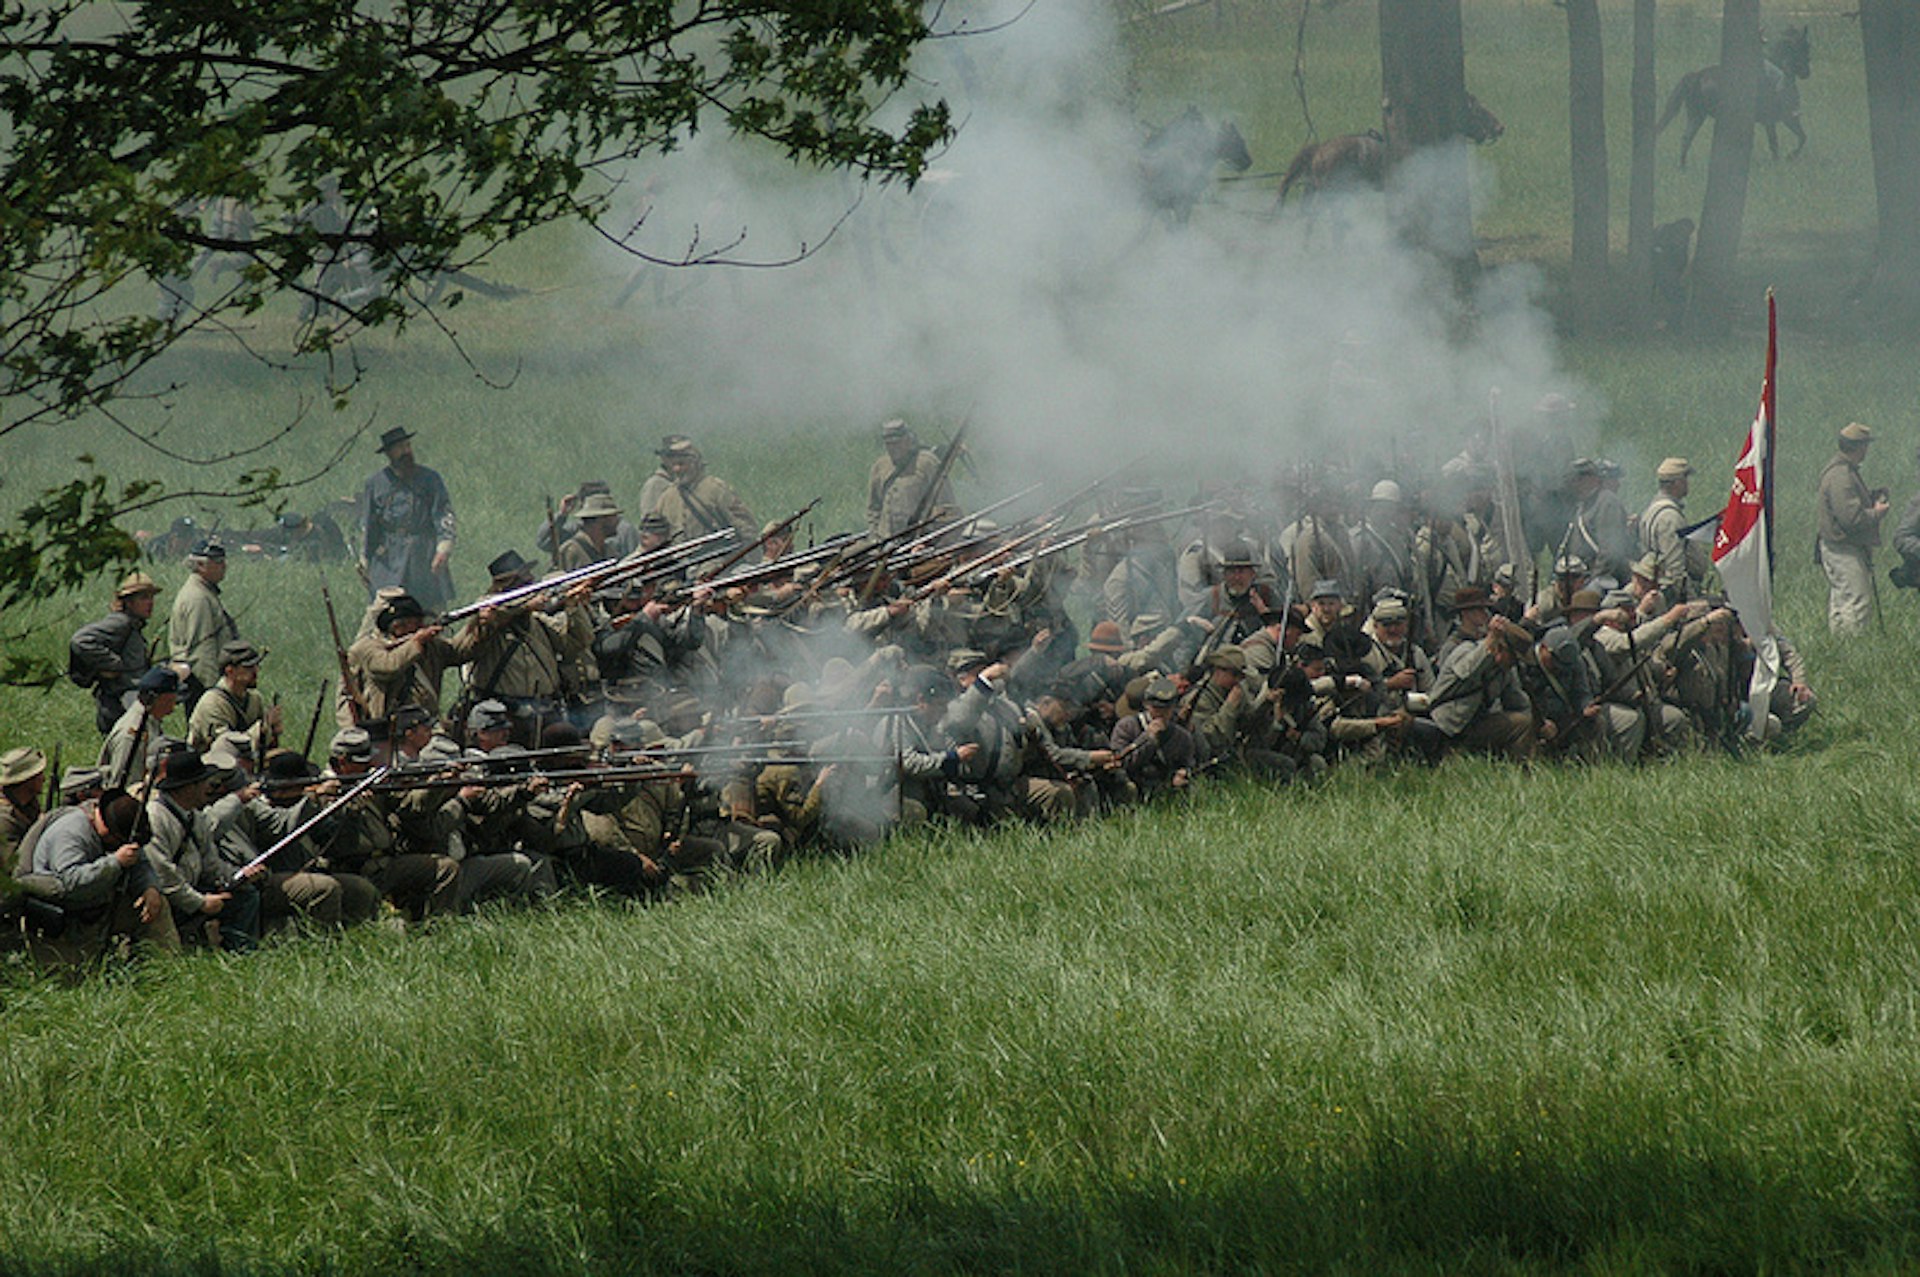 A reenactment of the Battle of Chancellorsville. Photo by Desiree Williams / CC BY-ND 2.0